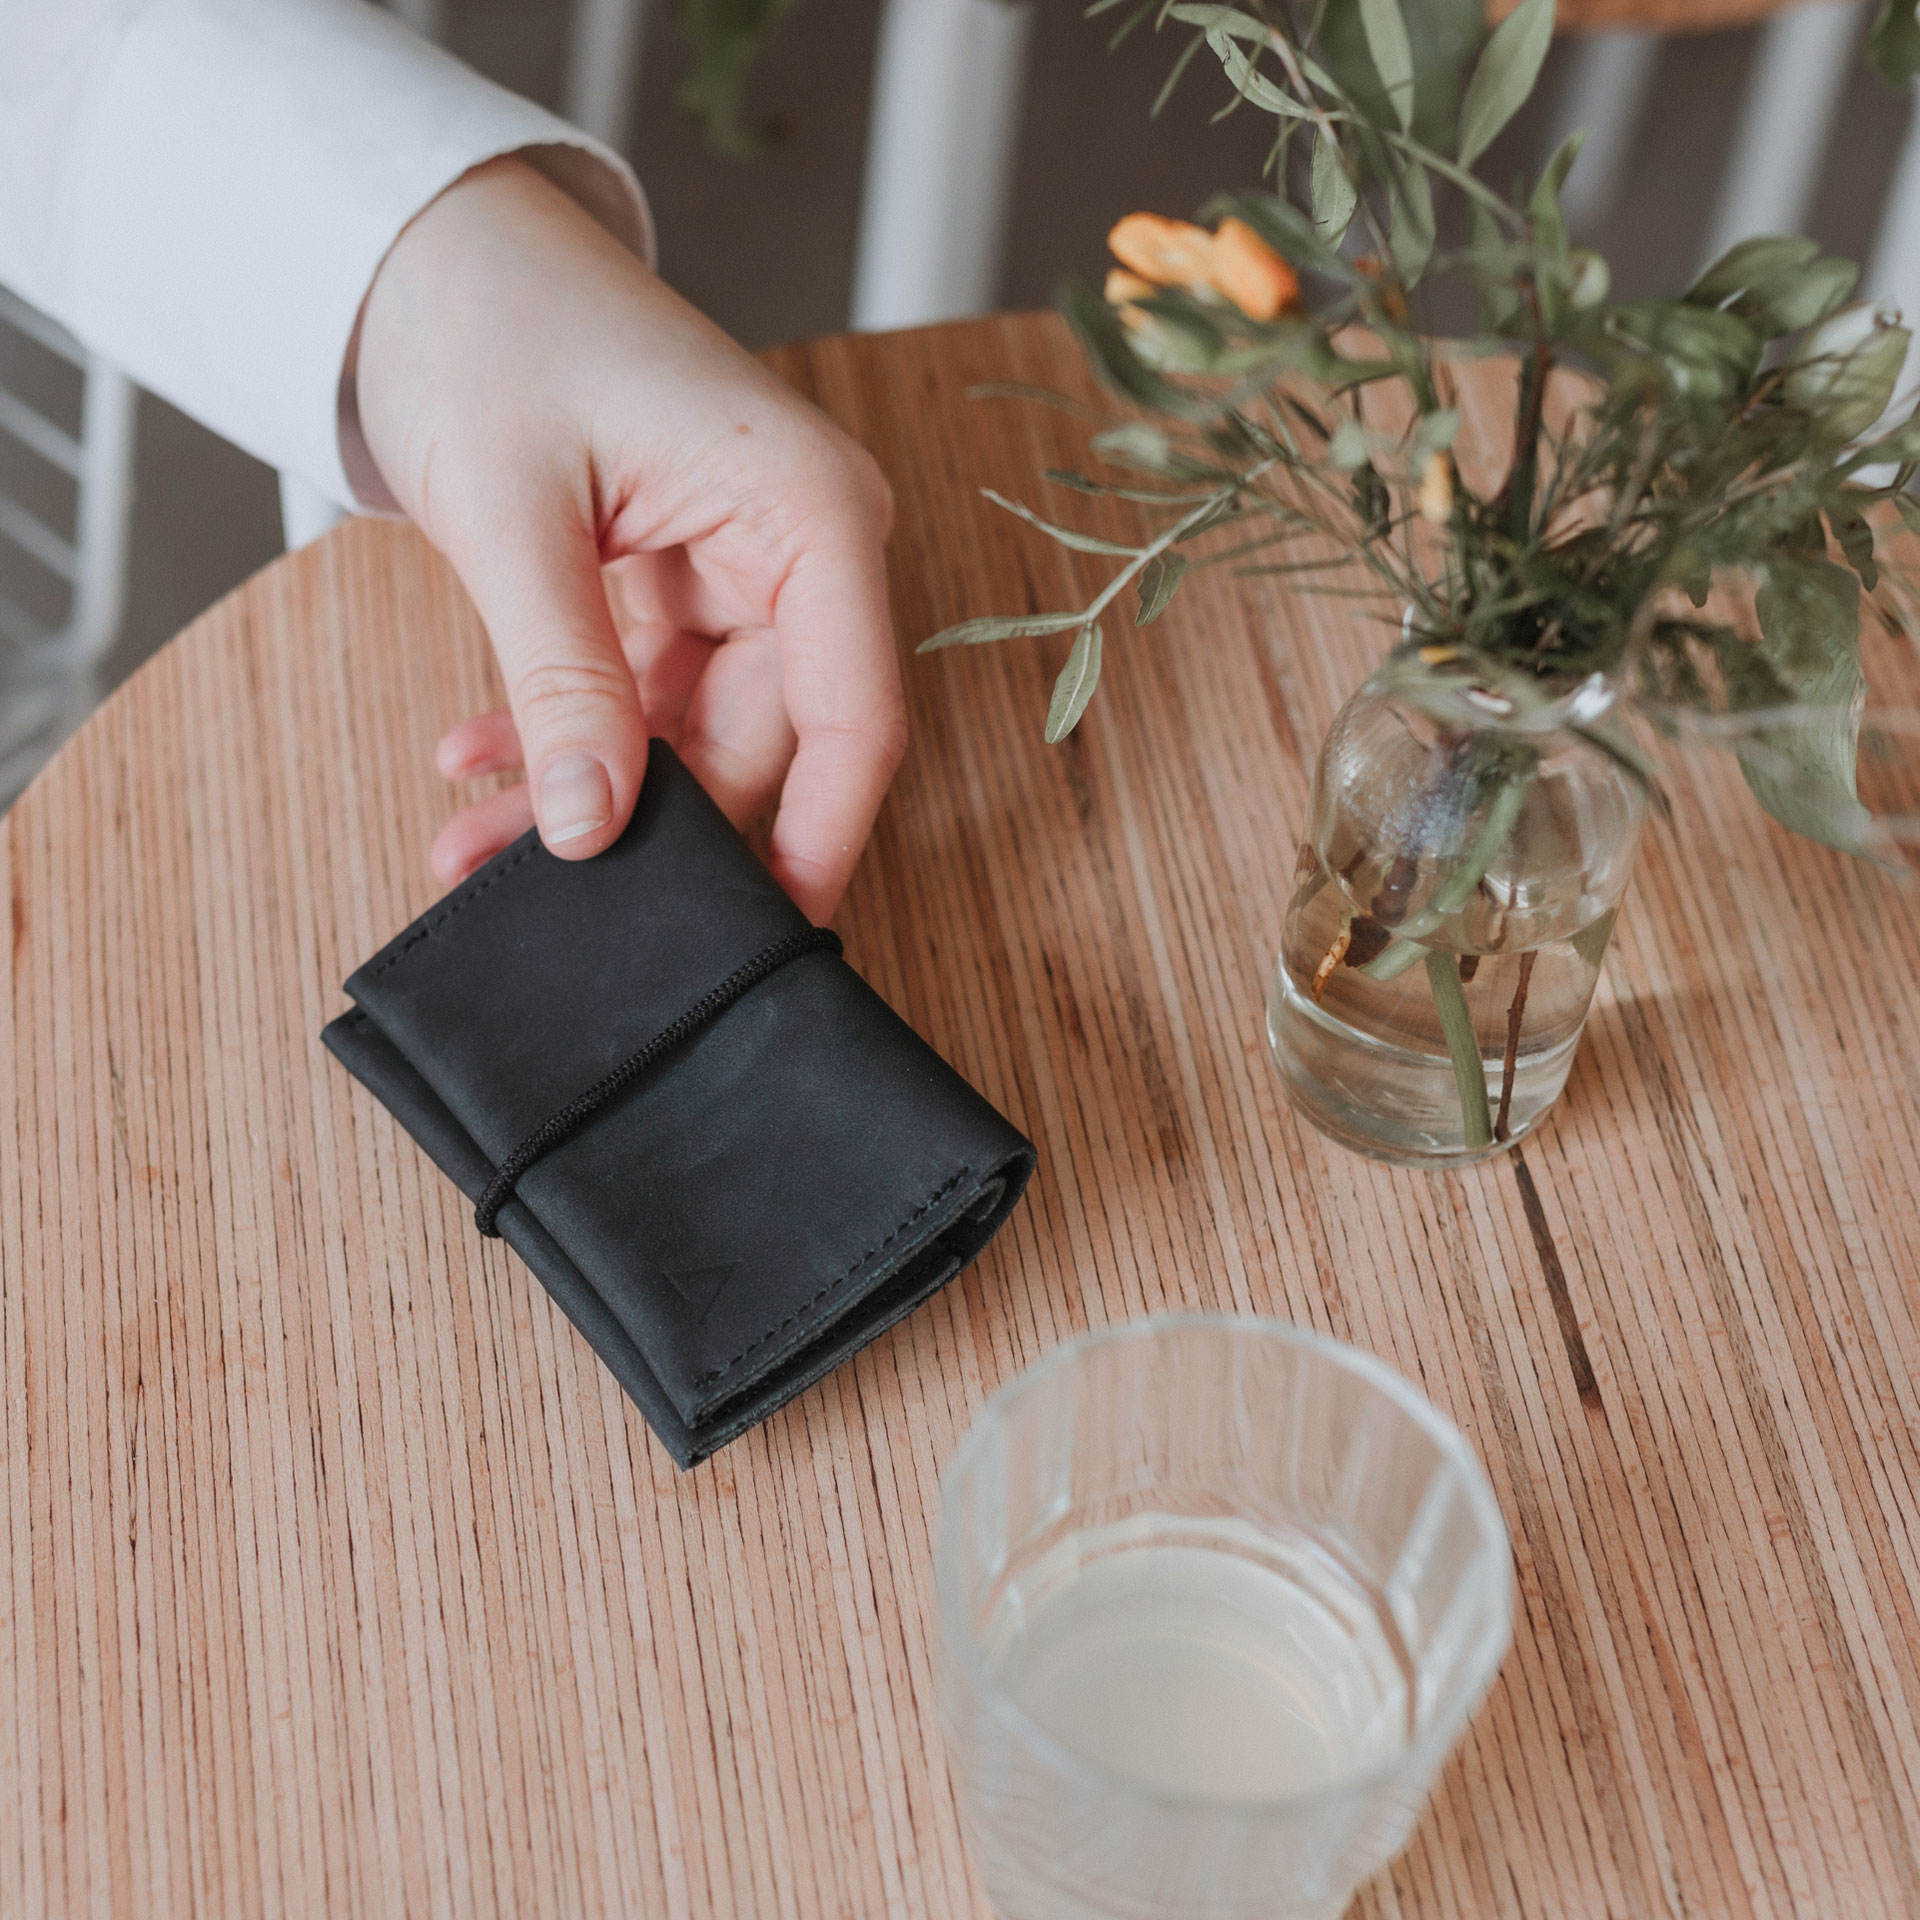 OLI natural leather wallet in charcoal with black closure band on wooden table with water glass